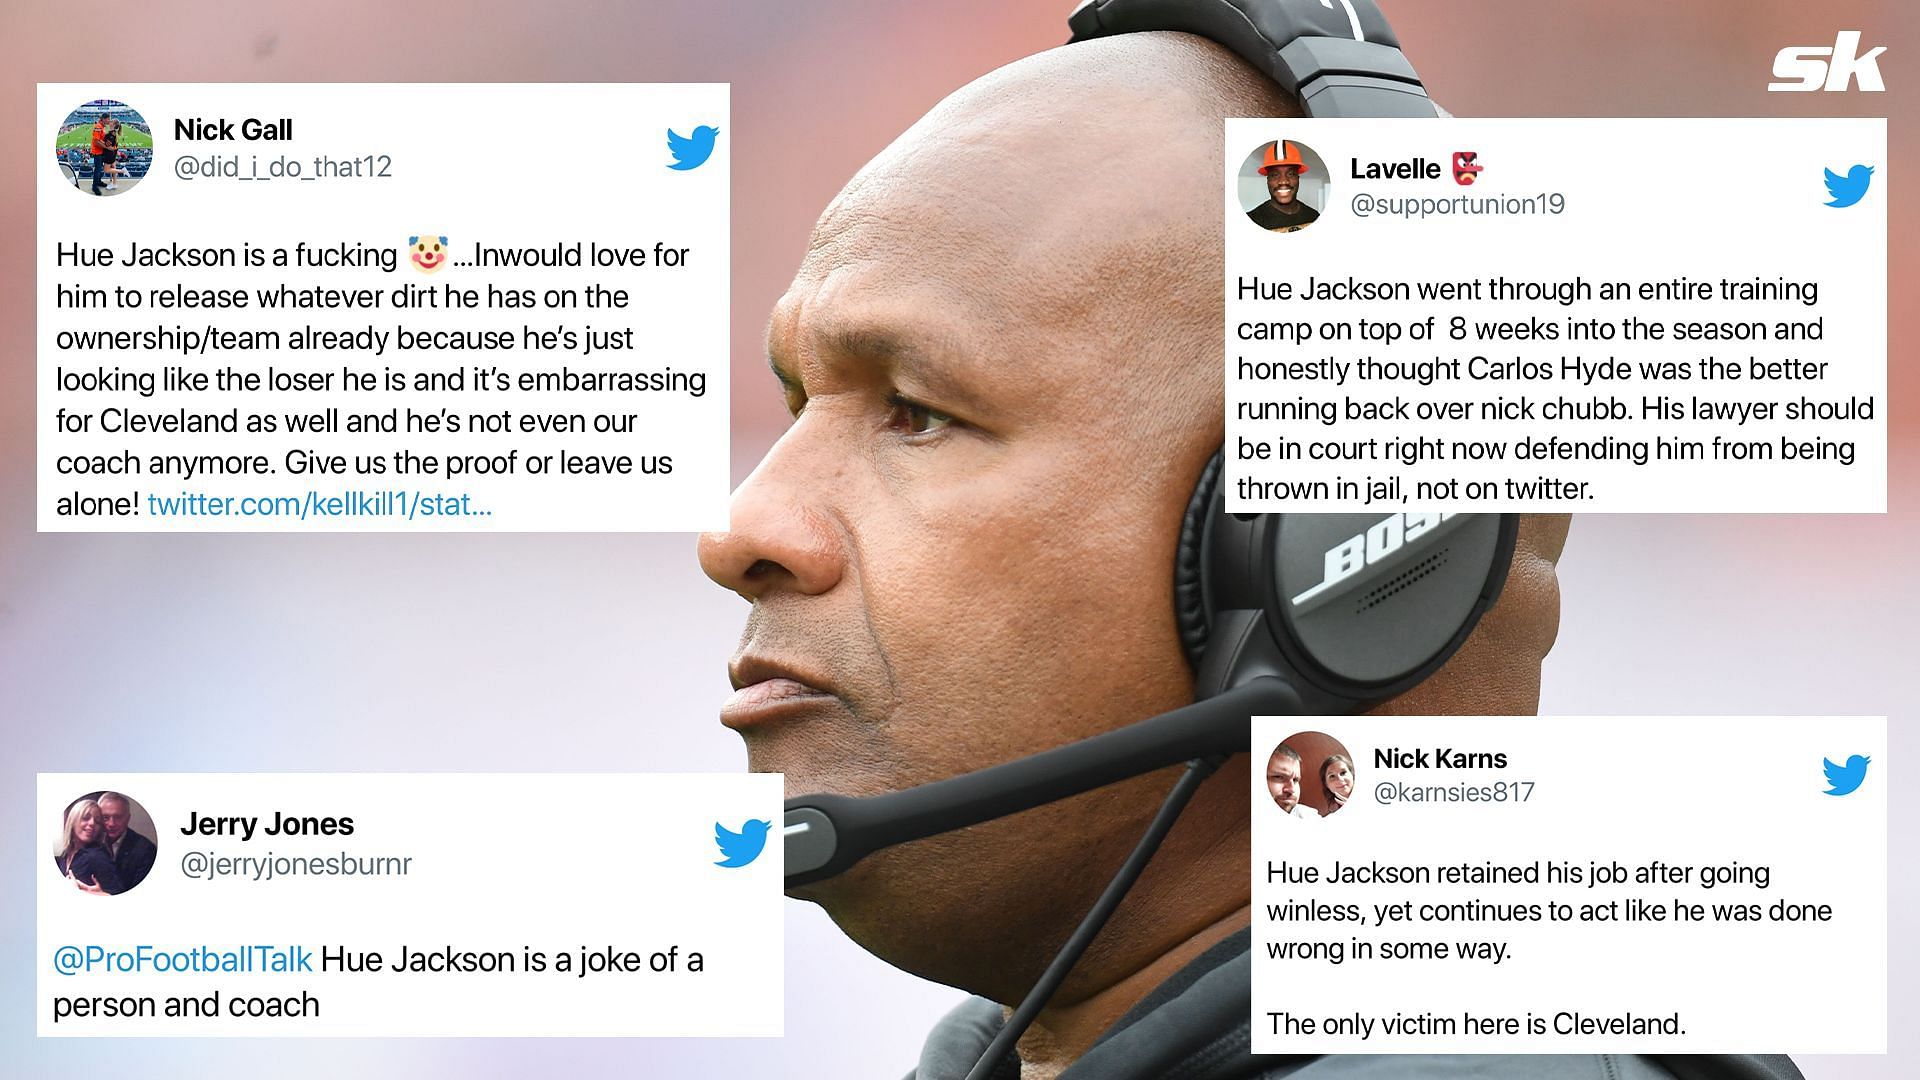 Hue Jackson excoriated in tweets by fans.